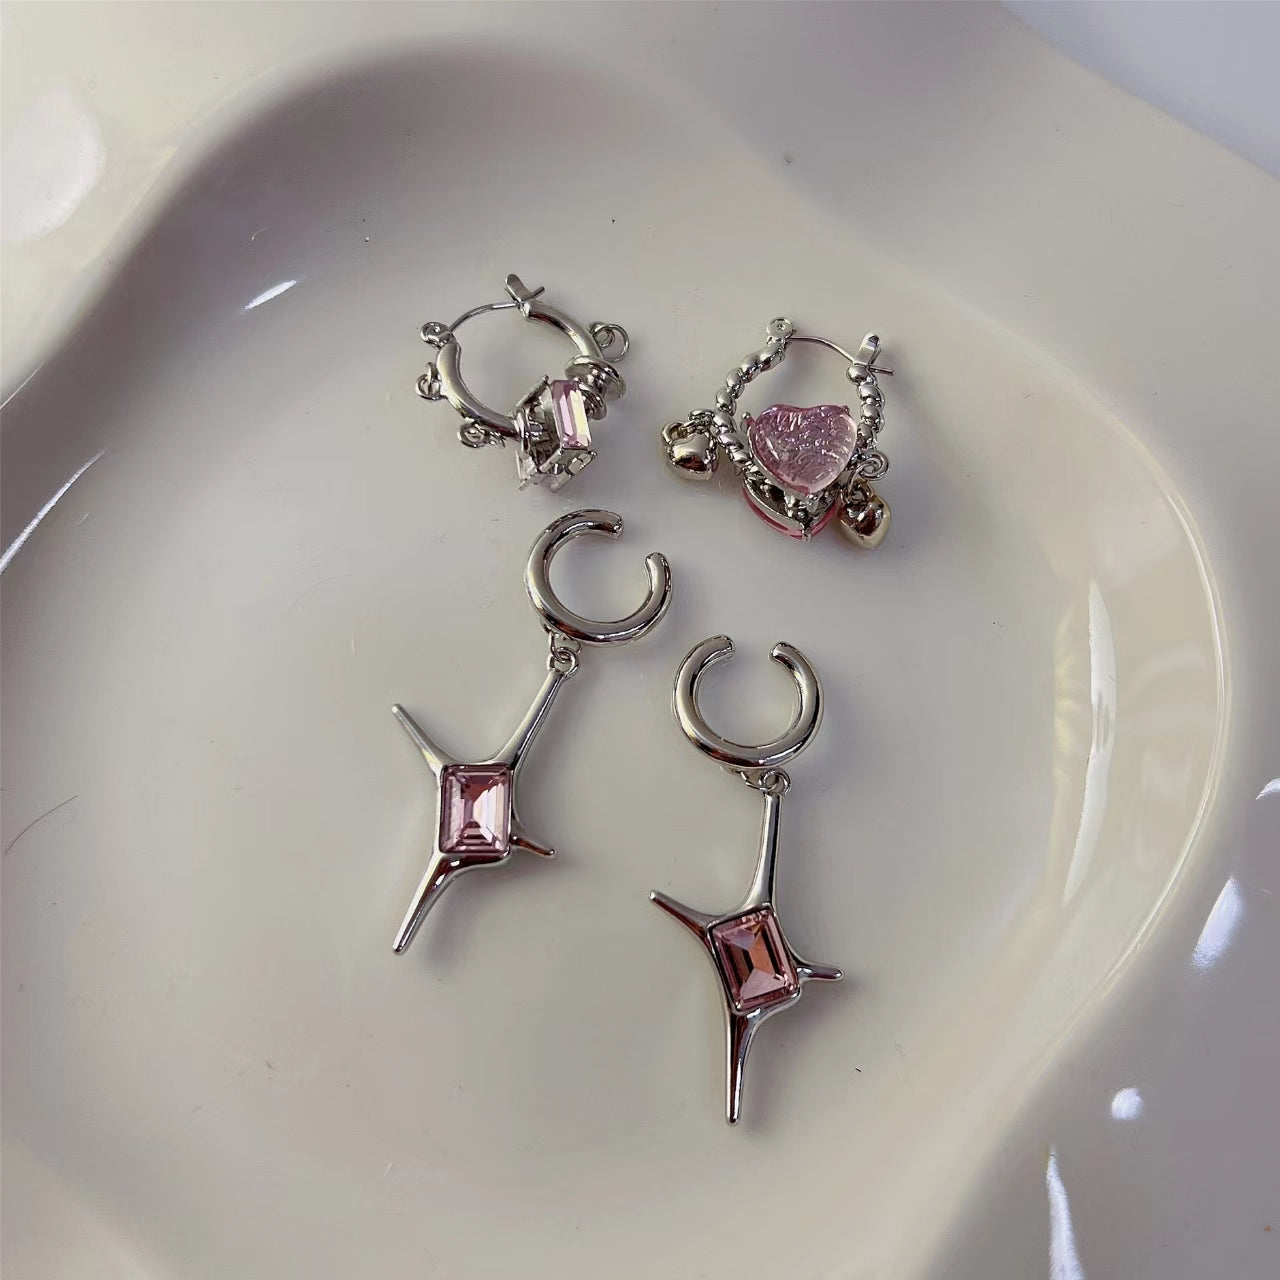 Pink Crystal Love Earrings are lovely and sweet